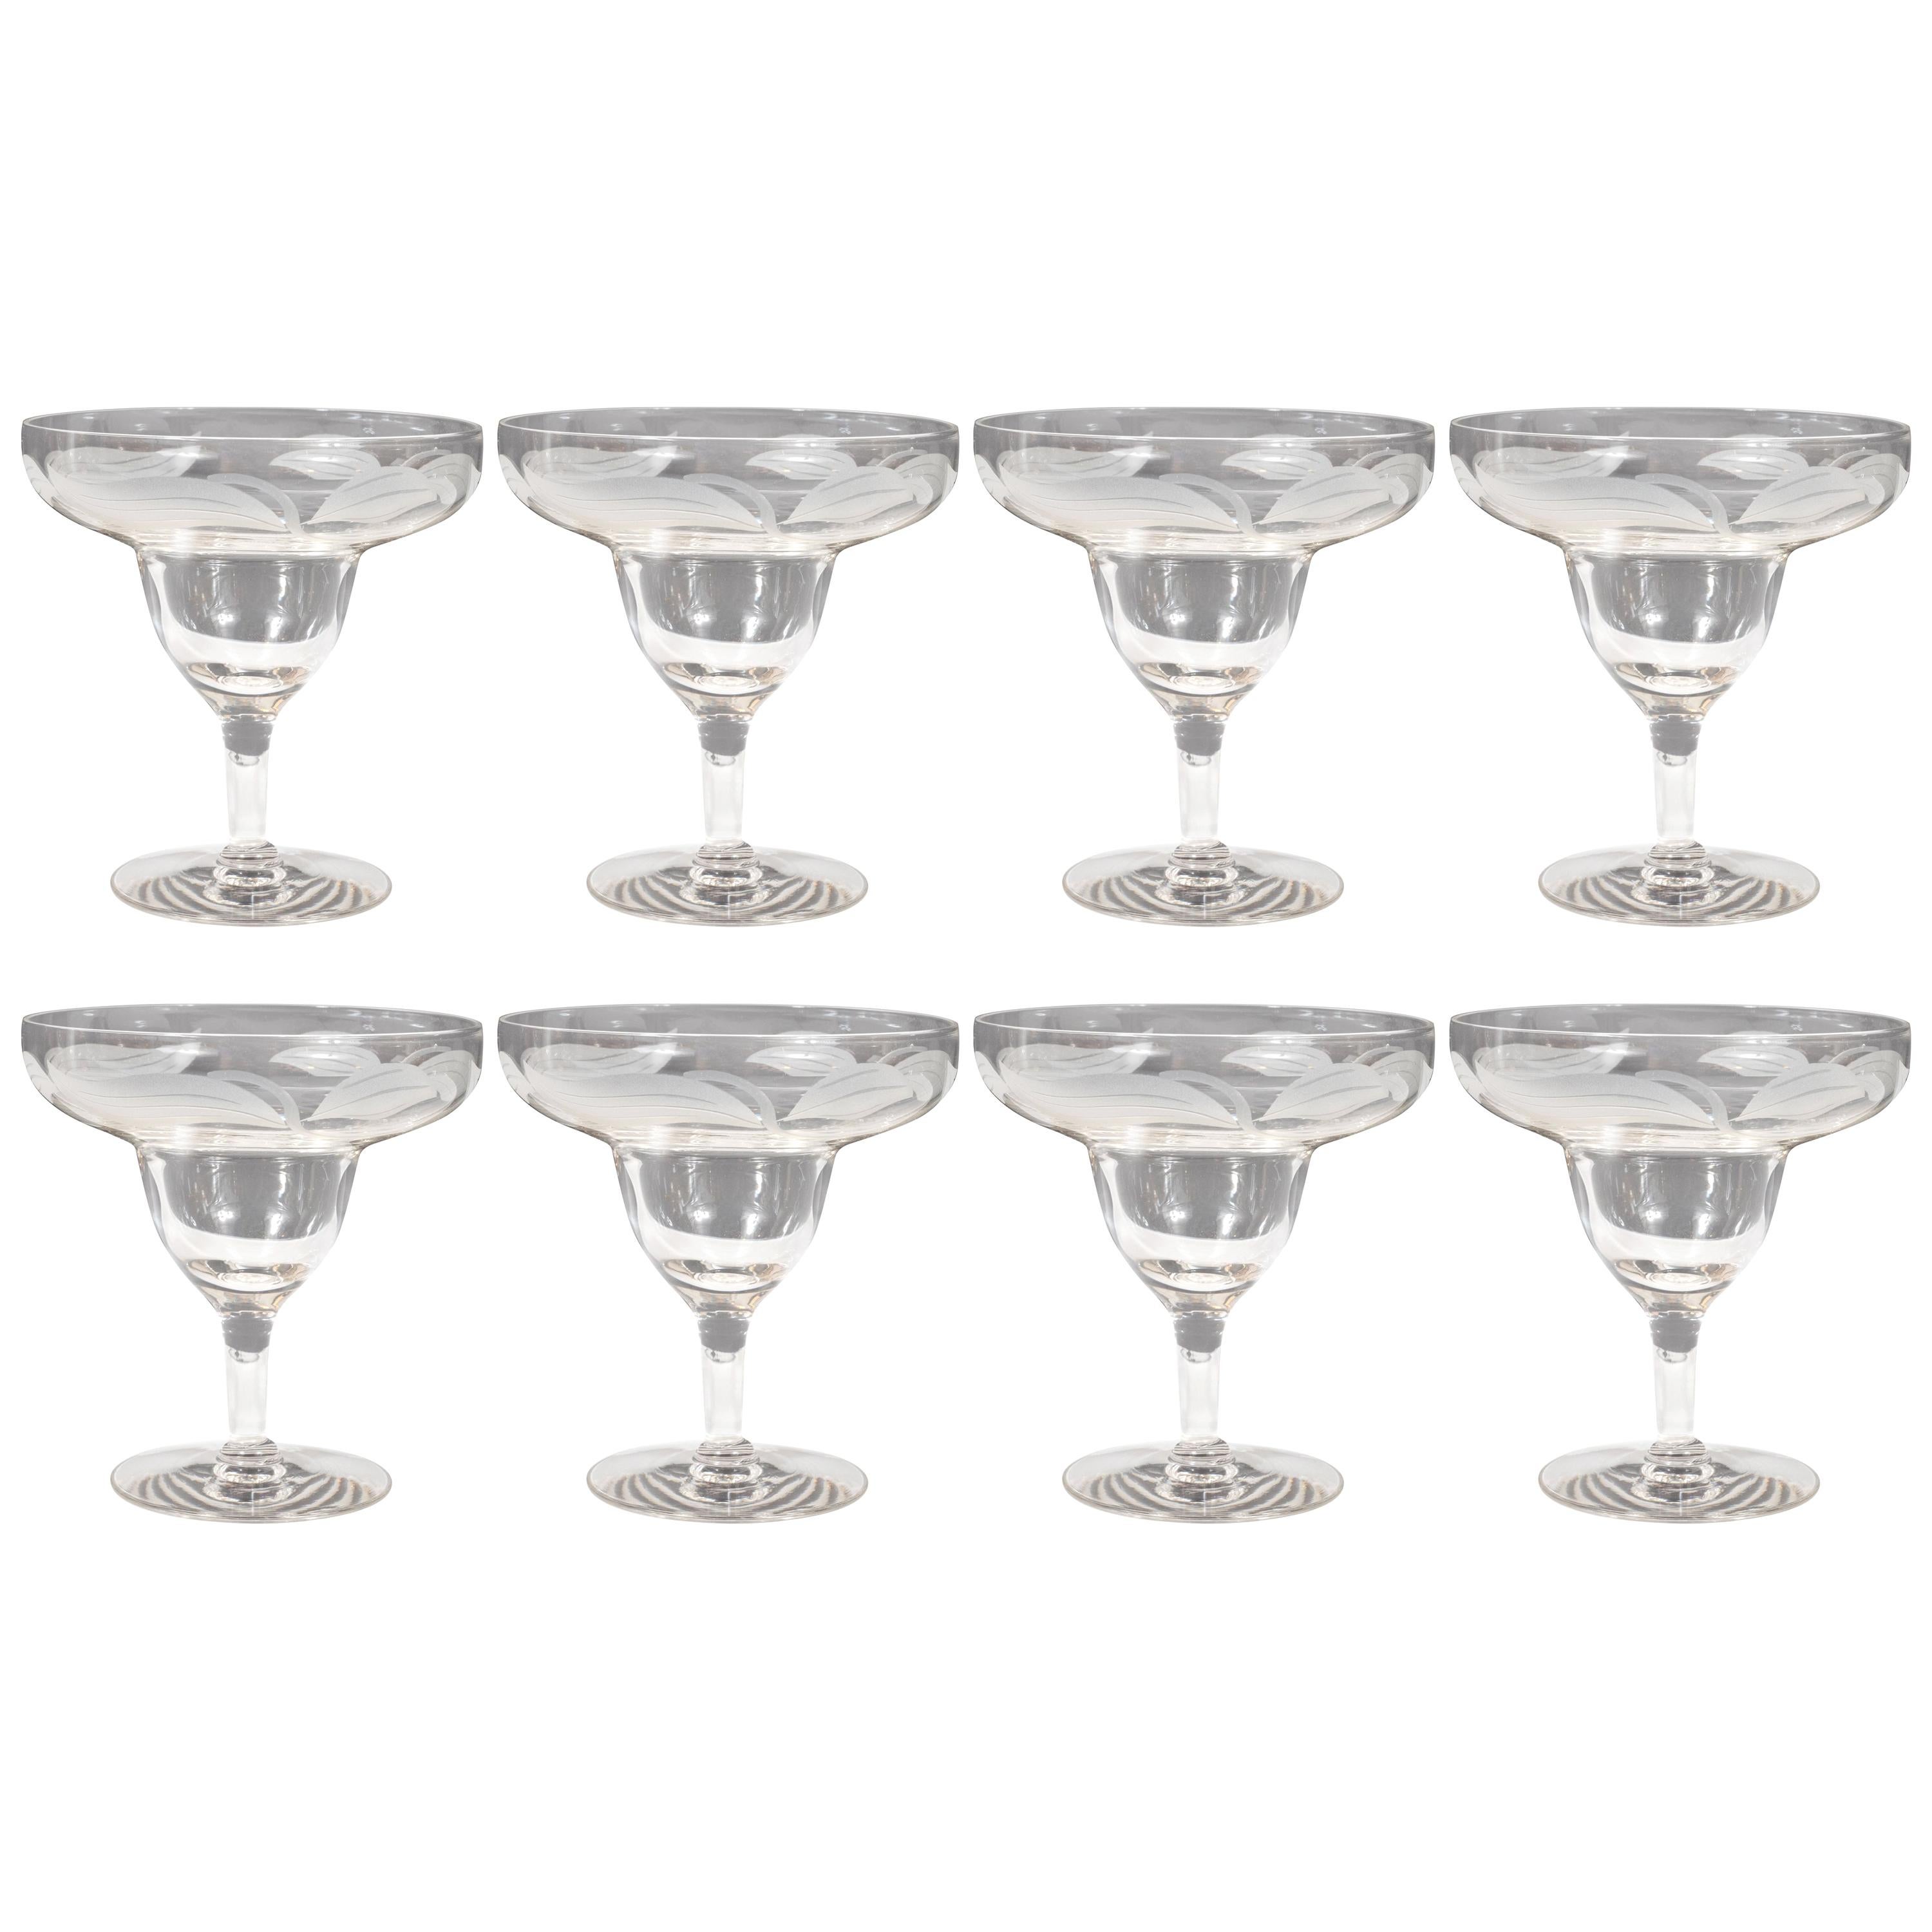 Art Deco Translucent Footed Glass Dessert Bowls with Frosted Foliate Detailing For Sale